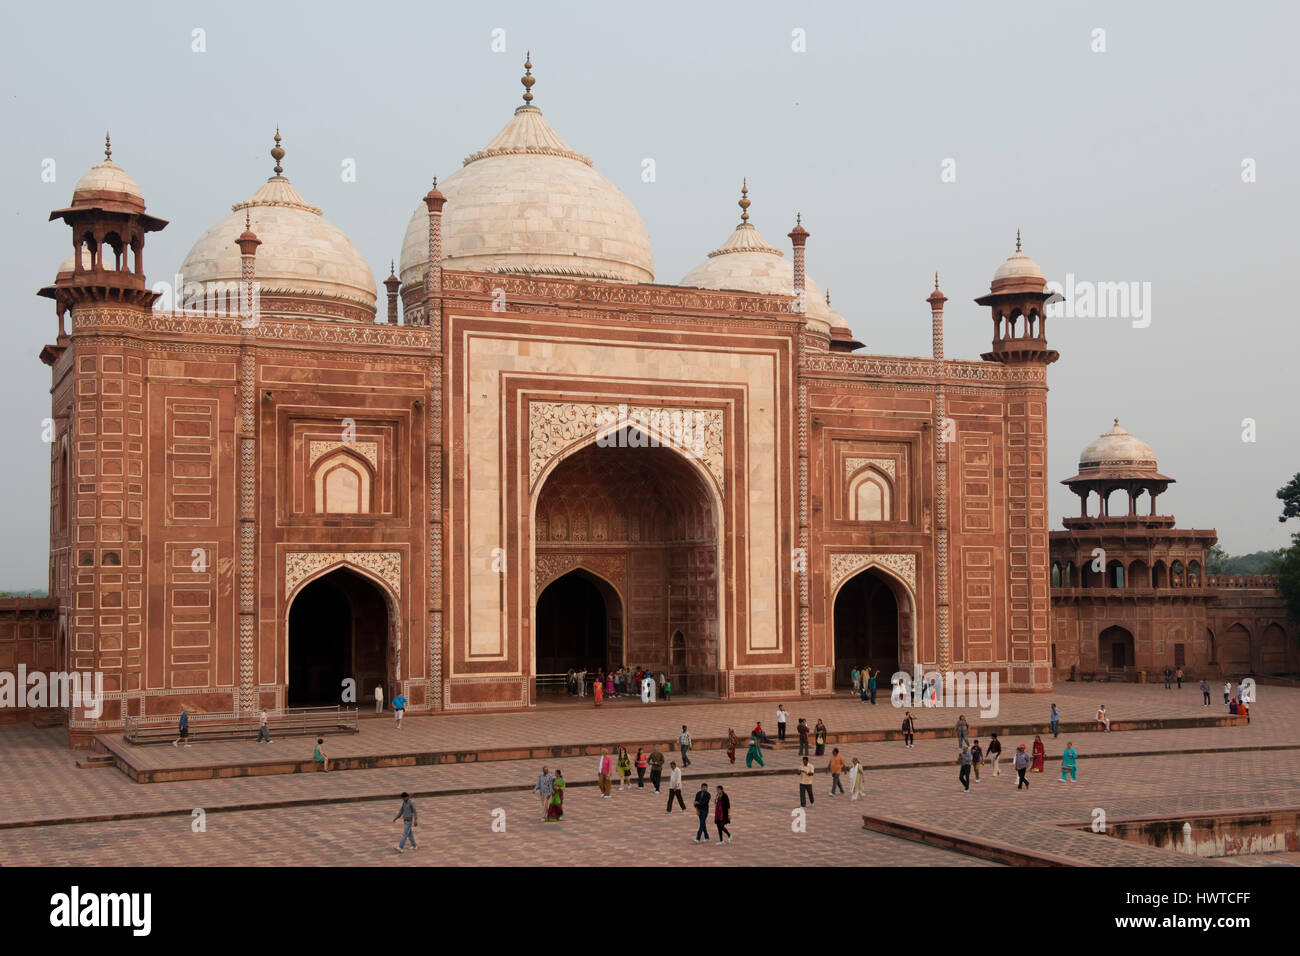 Mosque of the Taj Mahal, mausoleum erected by Shah Jahan, mughal Emperor, in honor of his wife Mumtaz Mahal. From 1983 is an Unesco world heritage sit Stock Photo